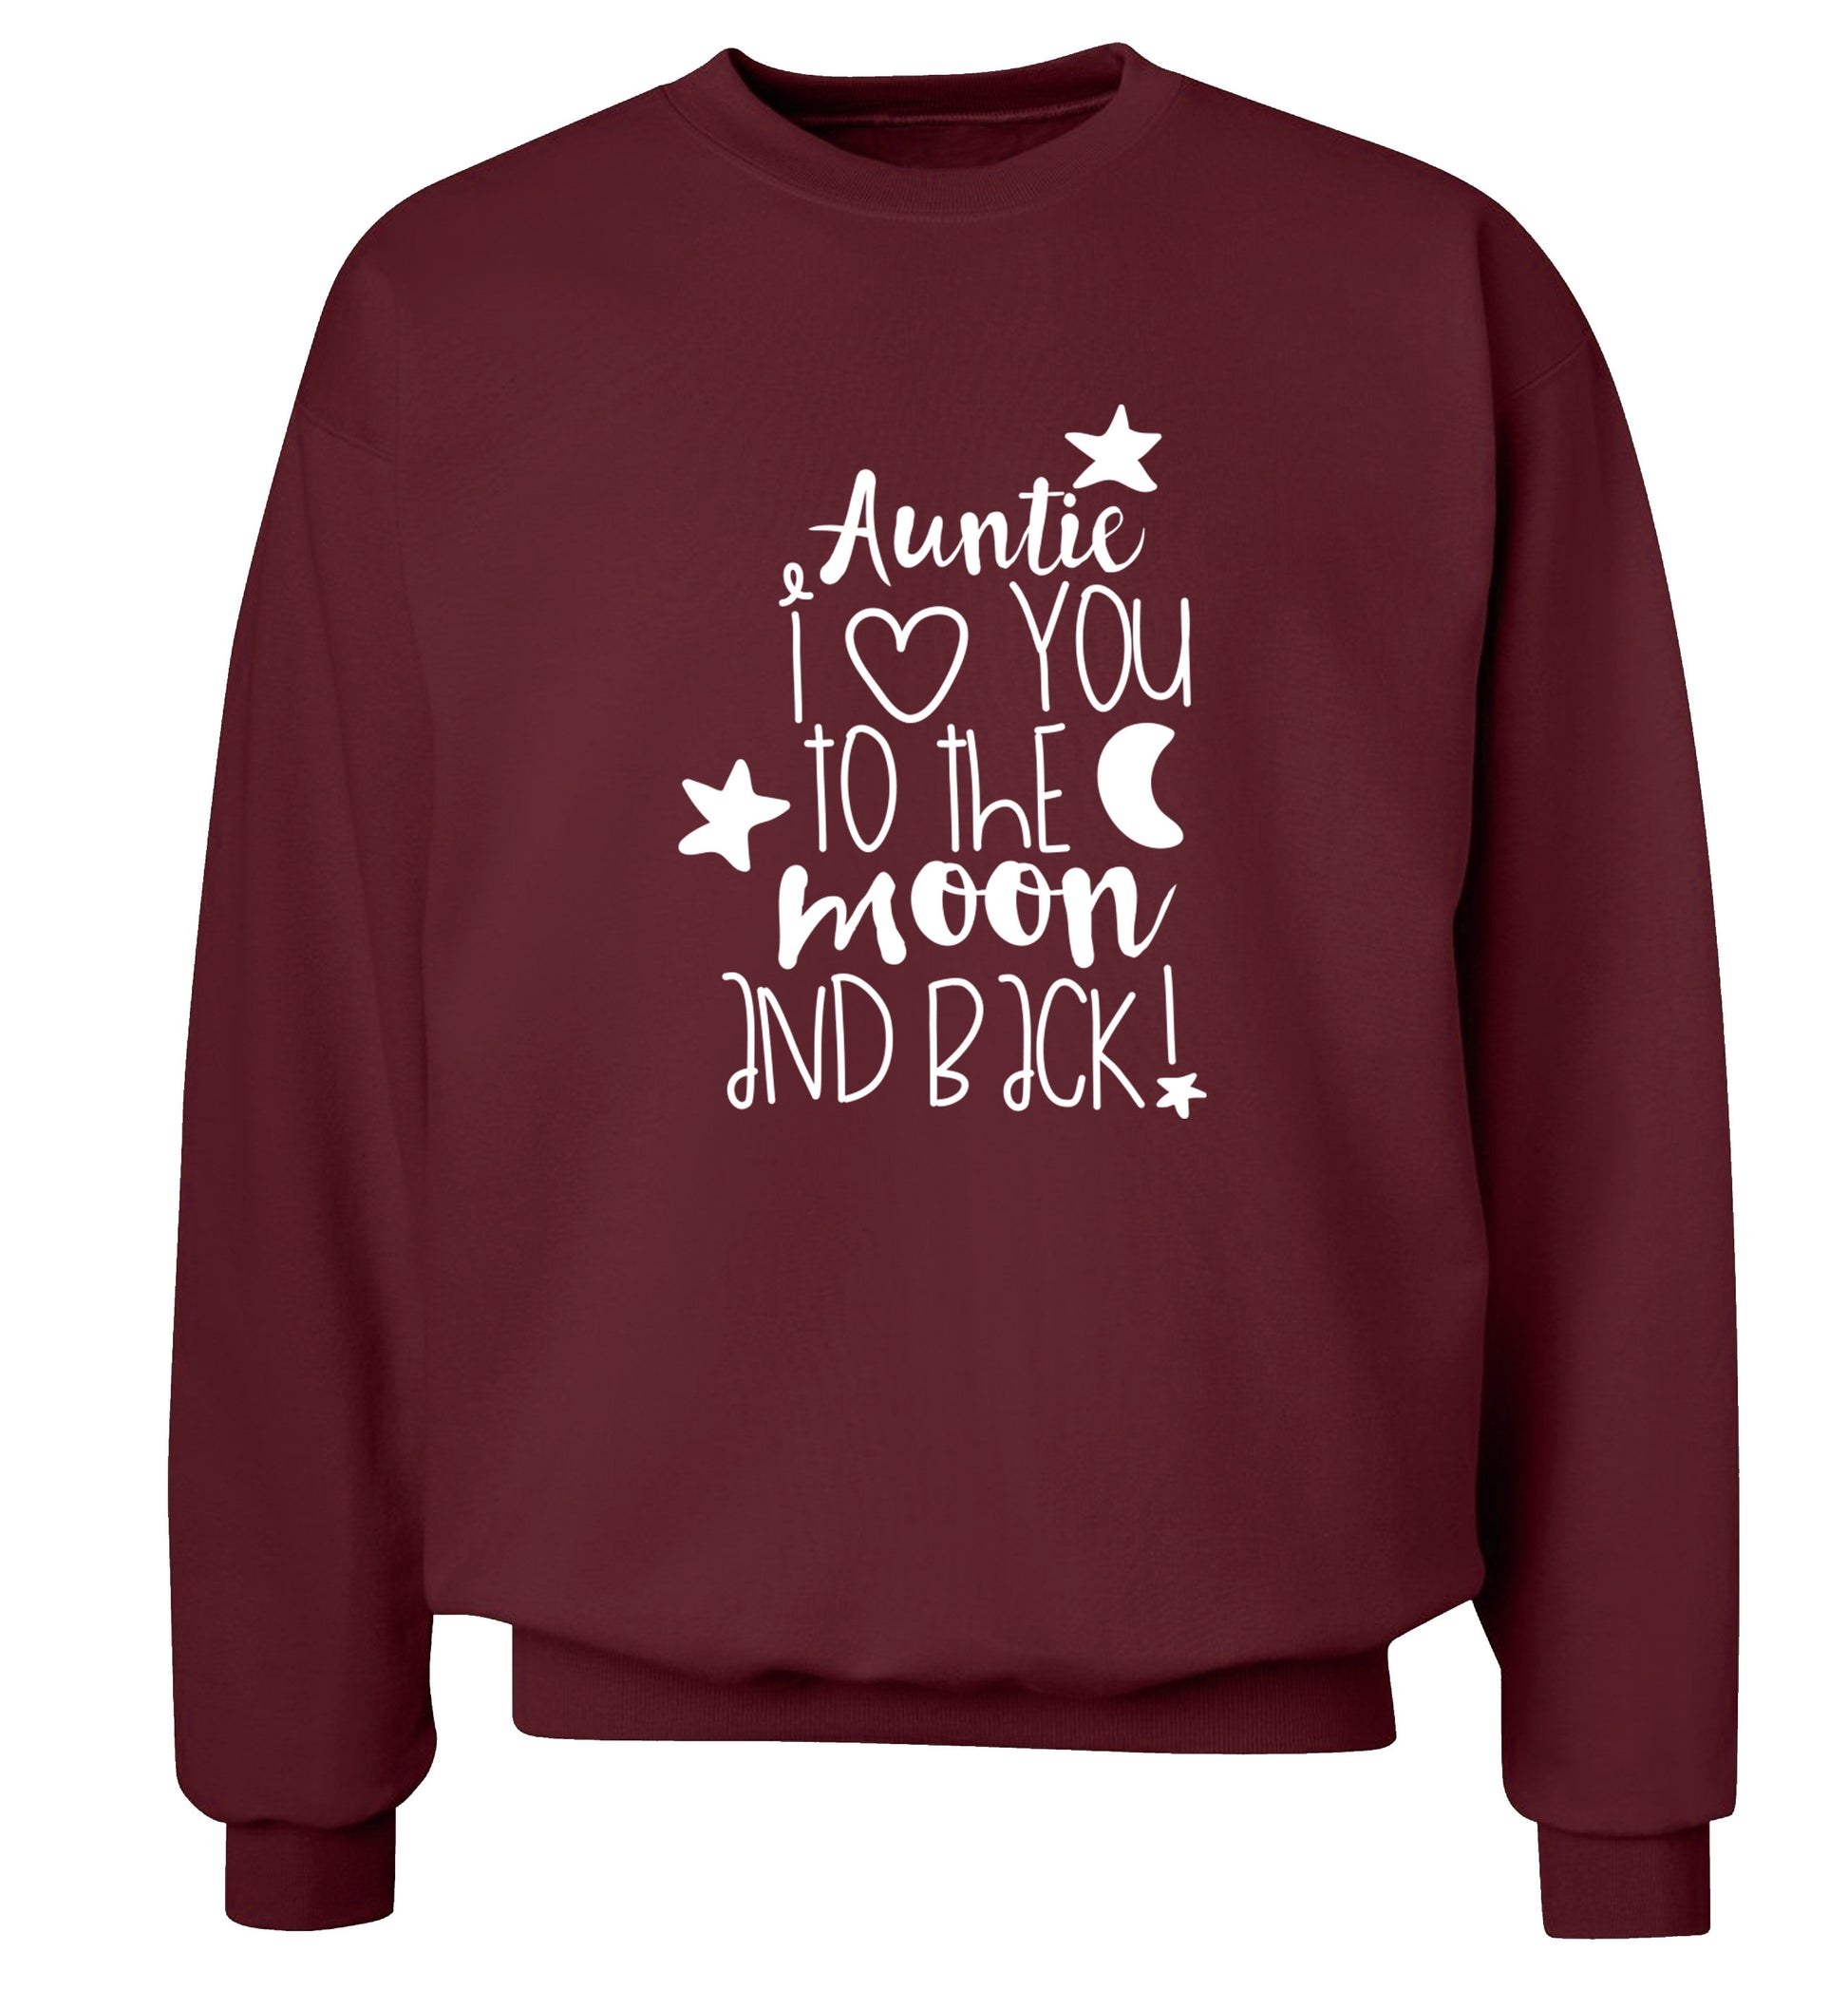 Auntie I love you to the moon and back Adult's unisex maroon  sweater 2XL